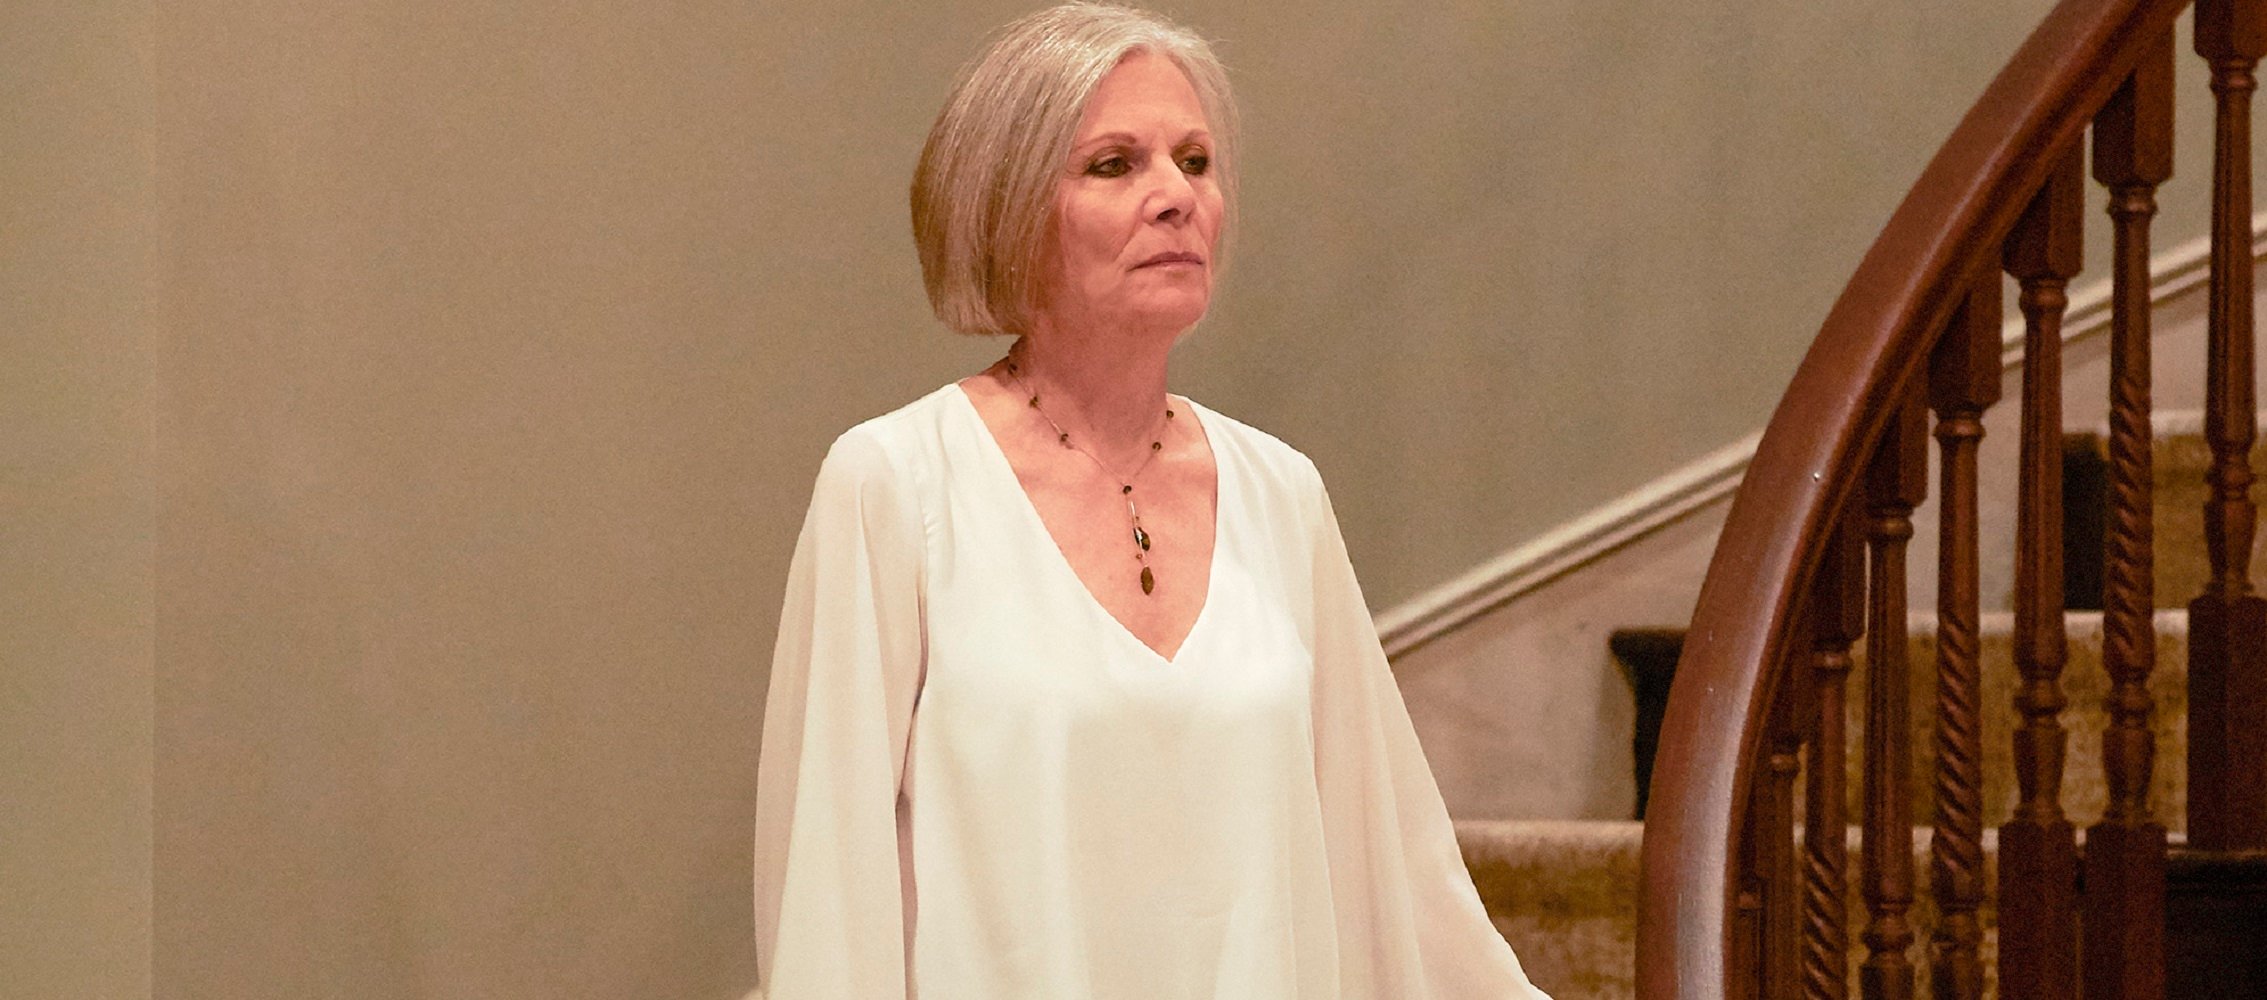 General Hospital star Jane Elliot is pictured here in a white sweater